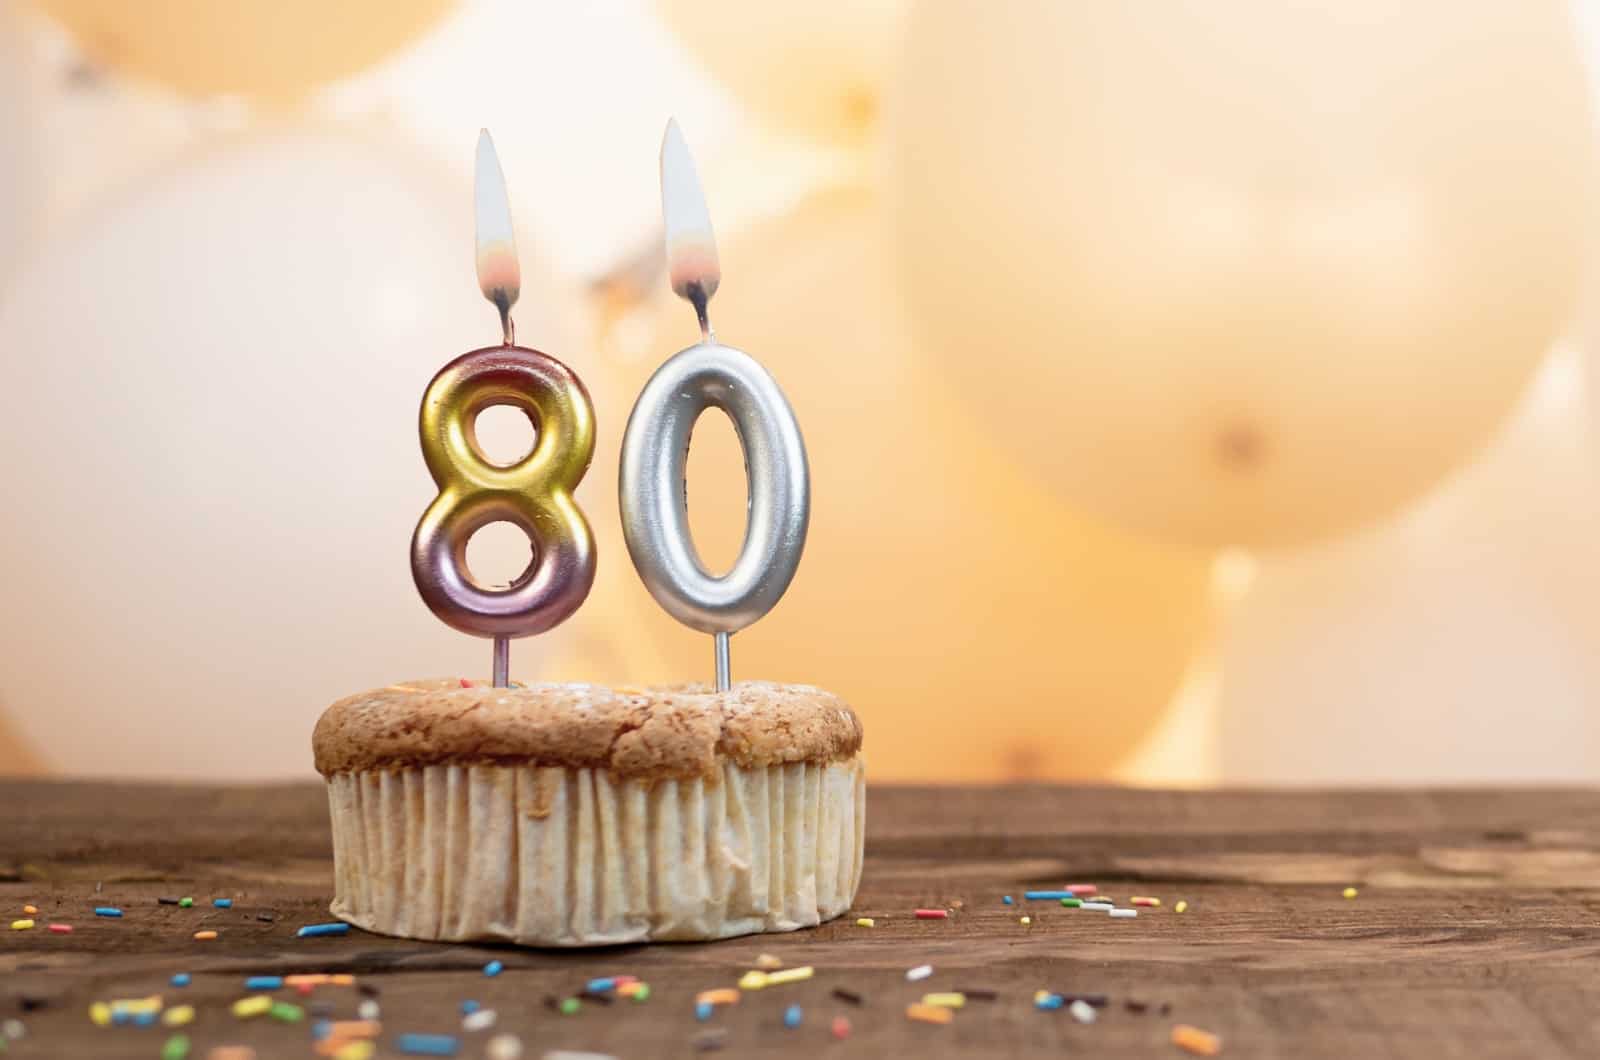 birthdate cake with number 80 candles